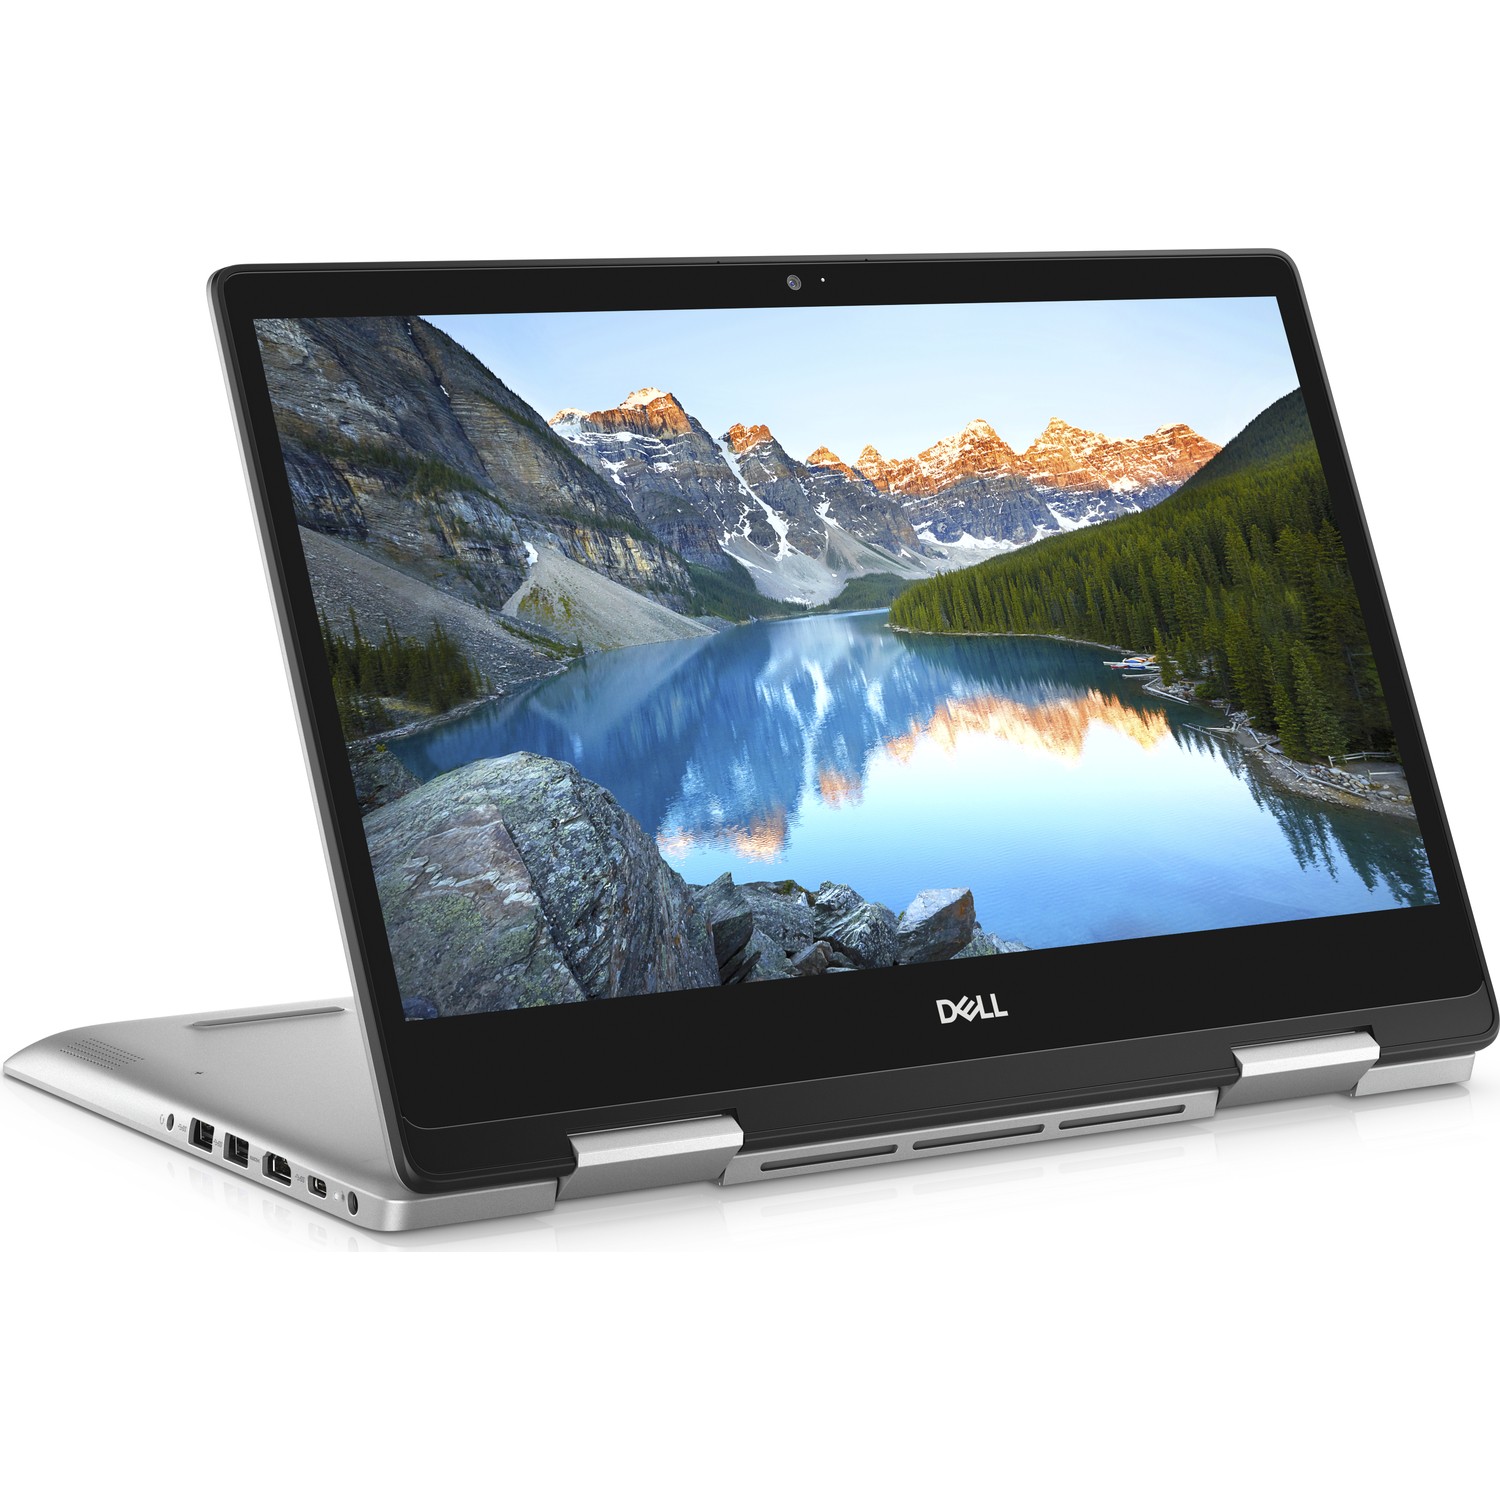 DELL INSPIRON 5482-FHDTS26W82C I5-8265U 8GB 256GB SSD 2GB MX130 14" FHD IPS TOUCH WIN10 NOTEBOOK